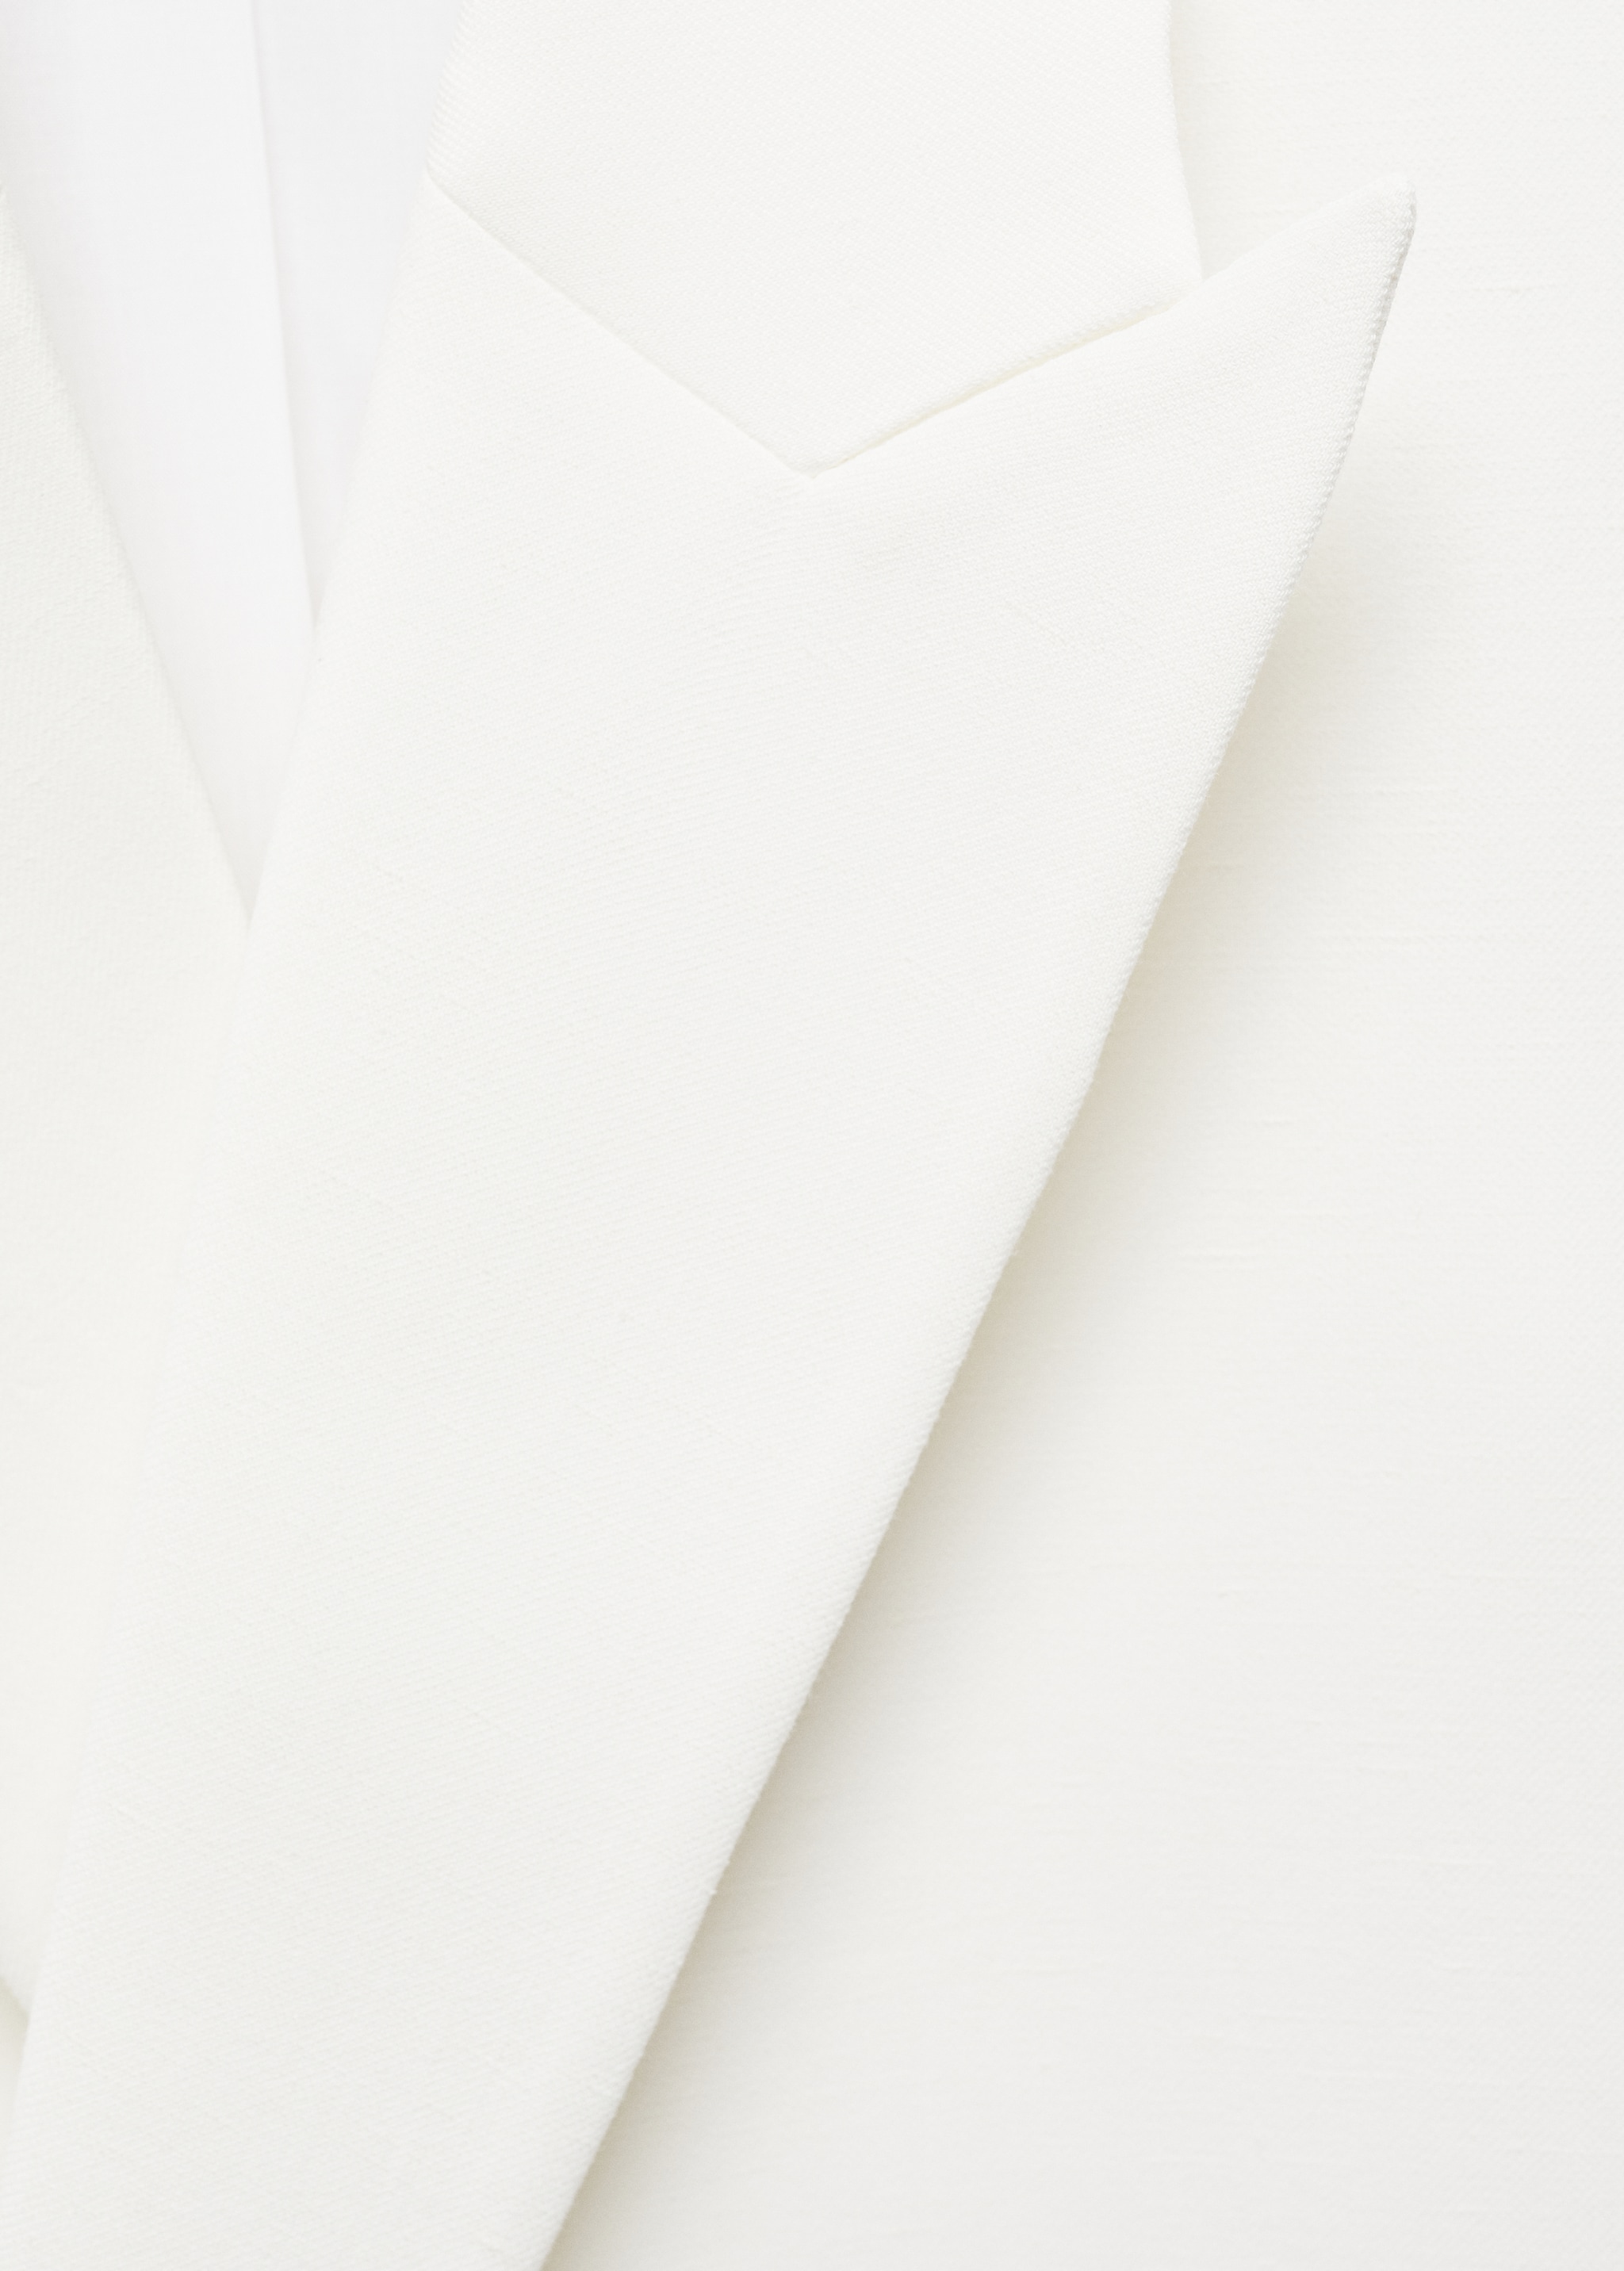 Suit jacket with adjustable back strap  - Details of the article 8